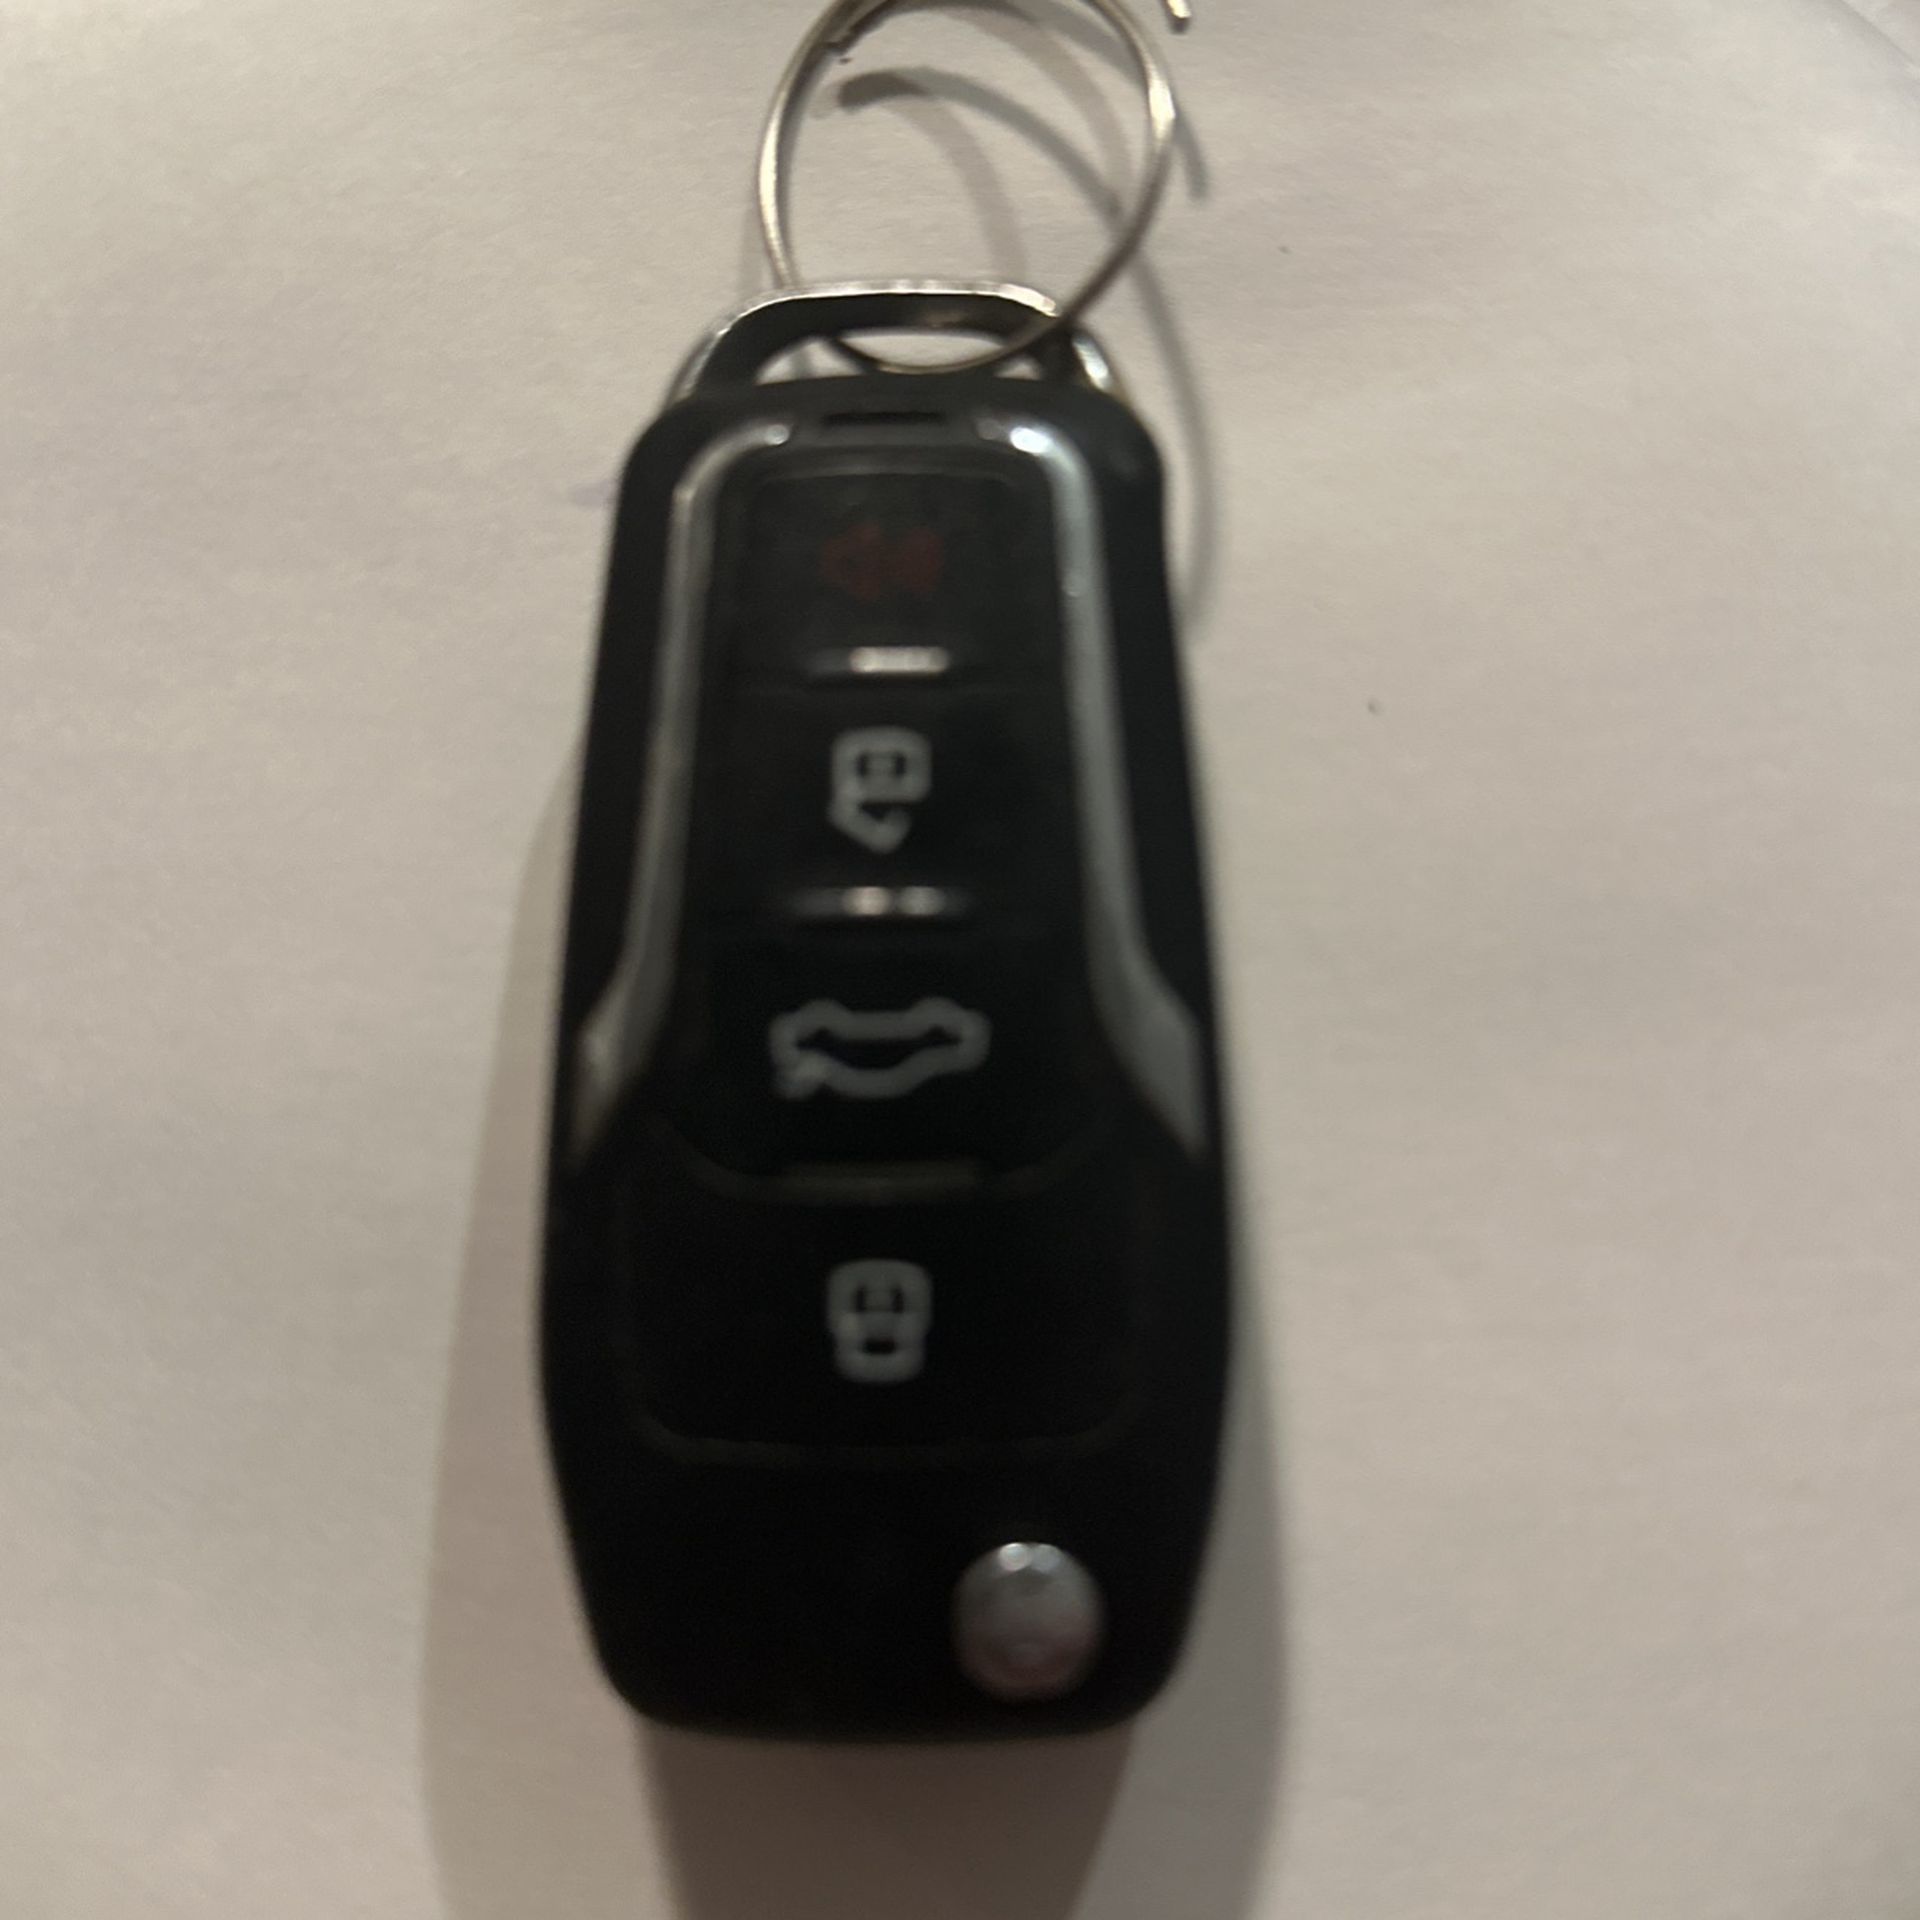 For Key Fob